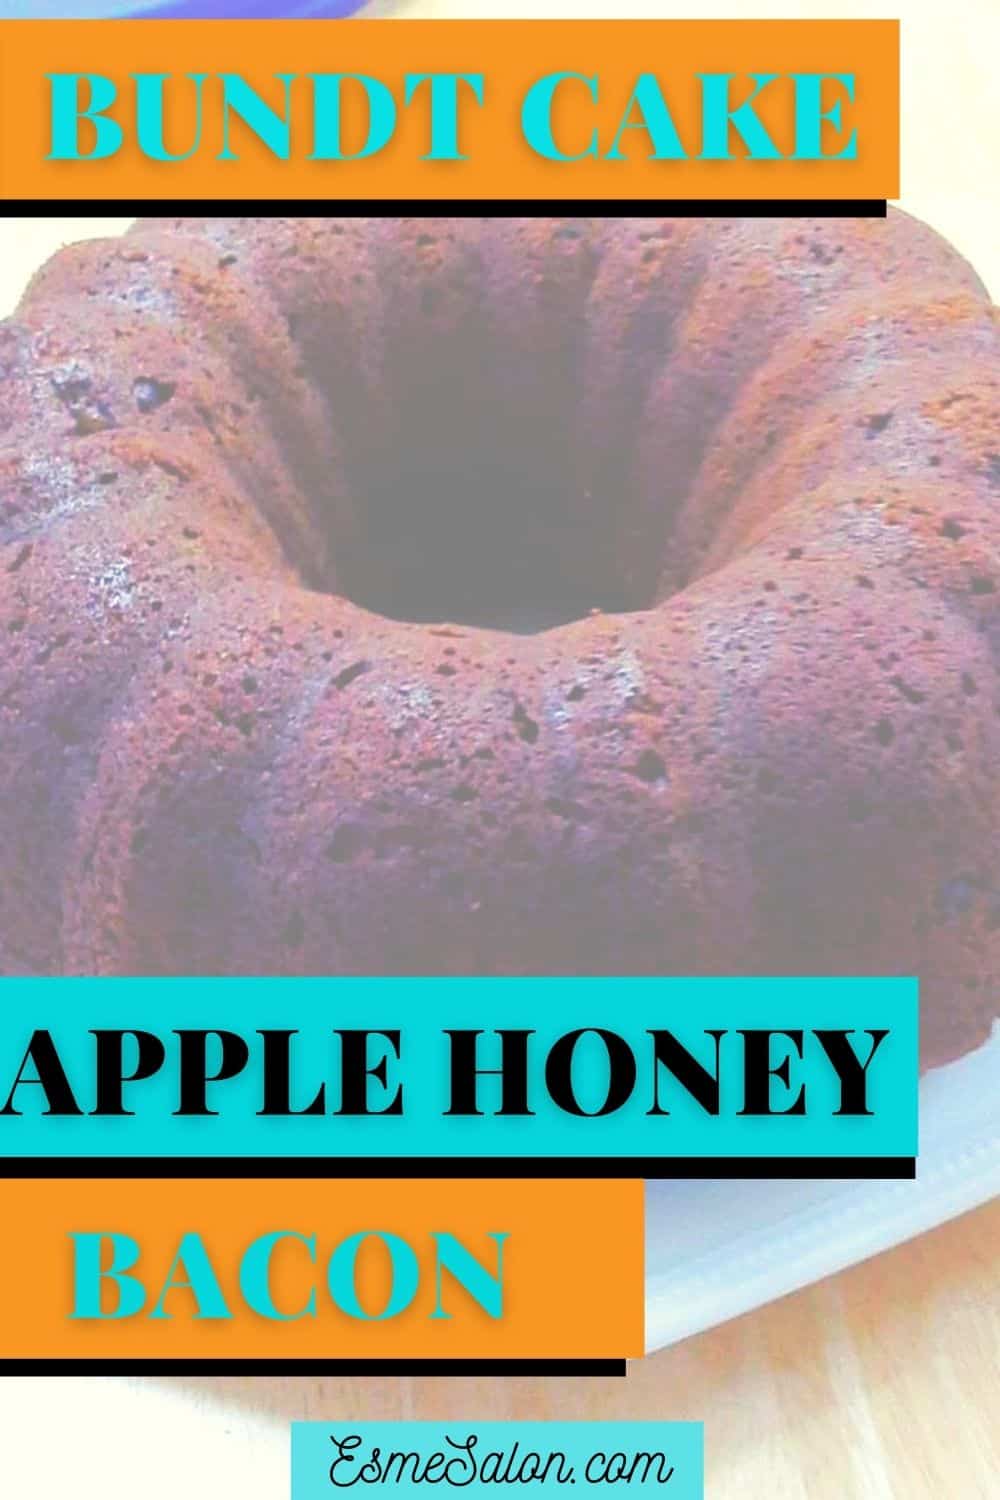 Apple Honey Bacon Bundt Cake, made to perfection, with a delicious variation with bacon added with the apple and honey.